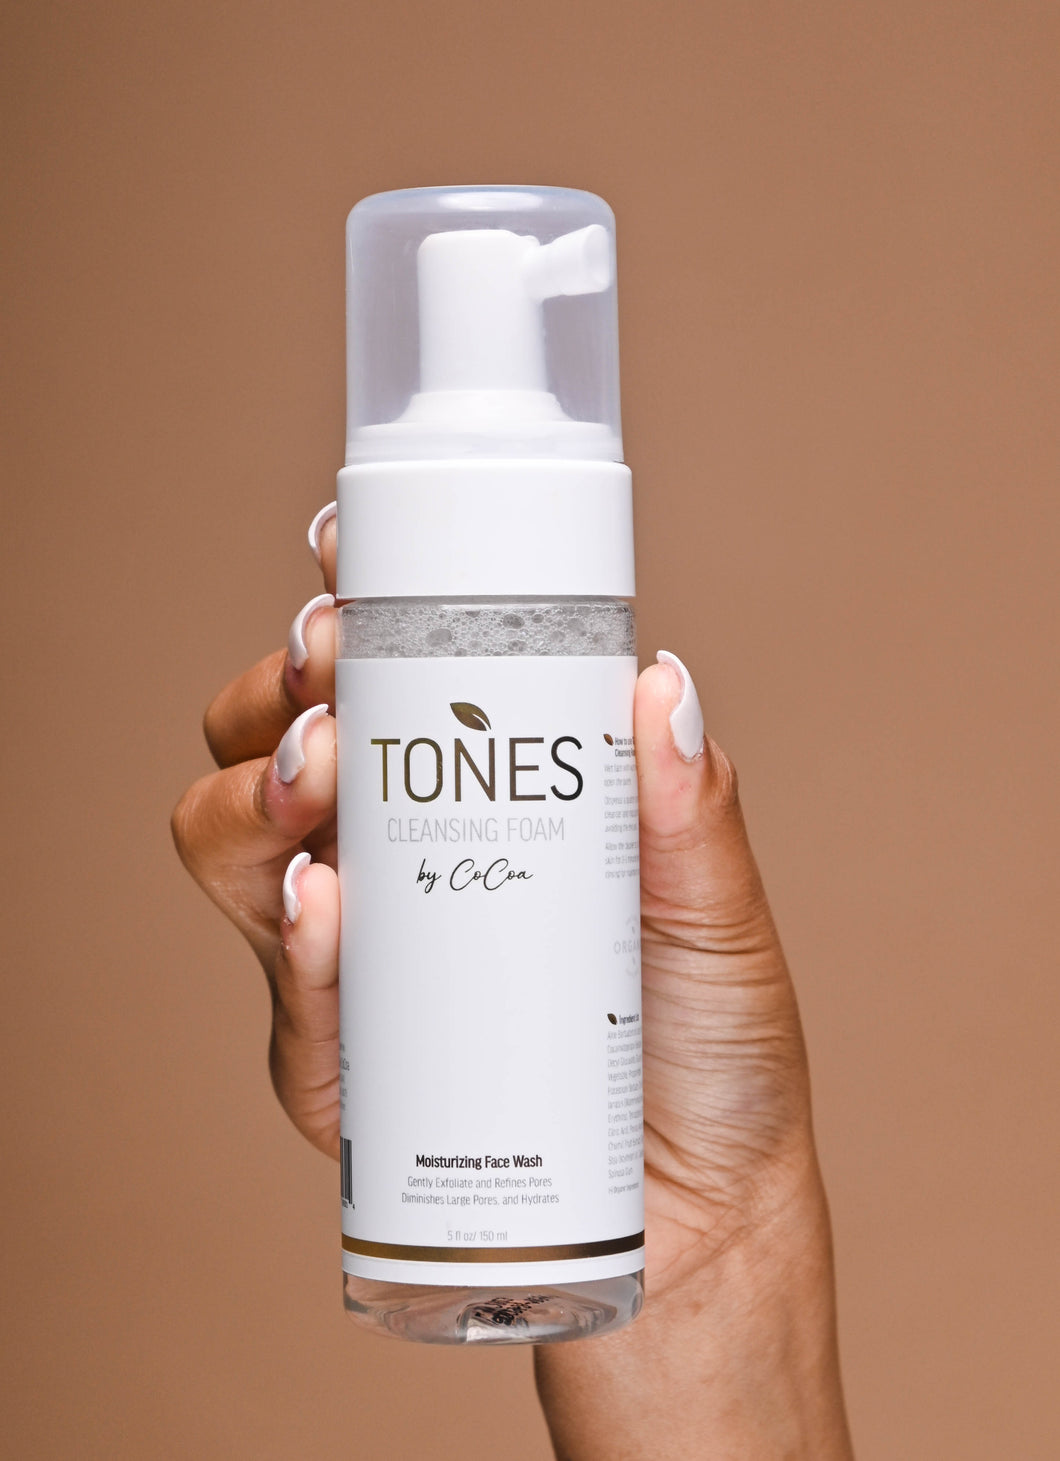 Tones By Cocoa™ Cleansing Foam with Aloe Vera - Alpha-hydroxy Acids + Cherry & Watermelon Extract